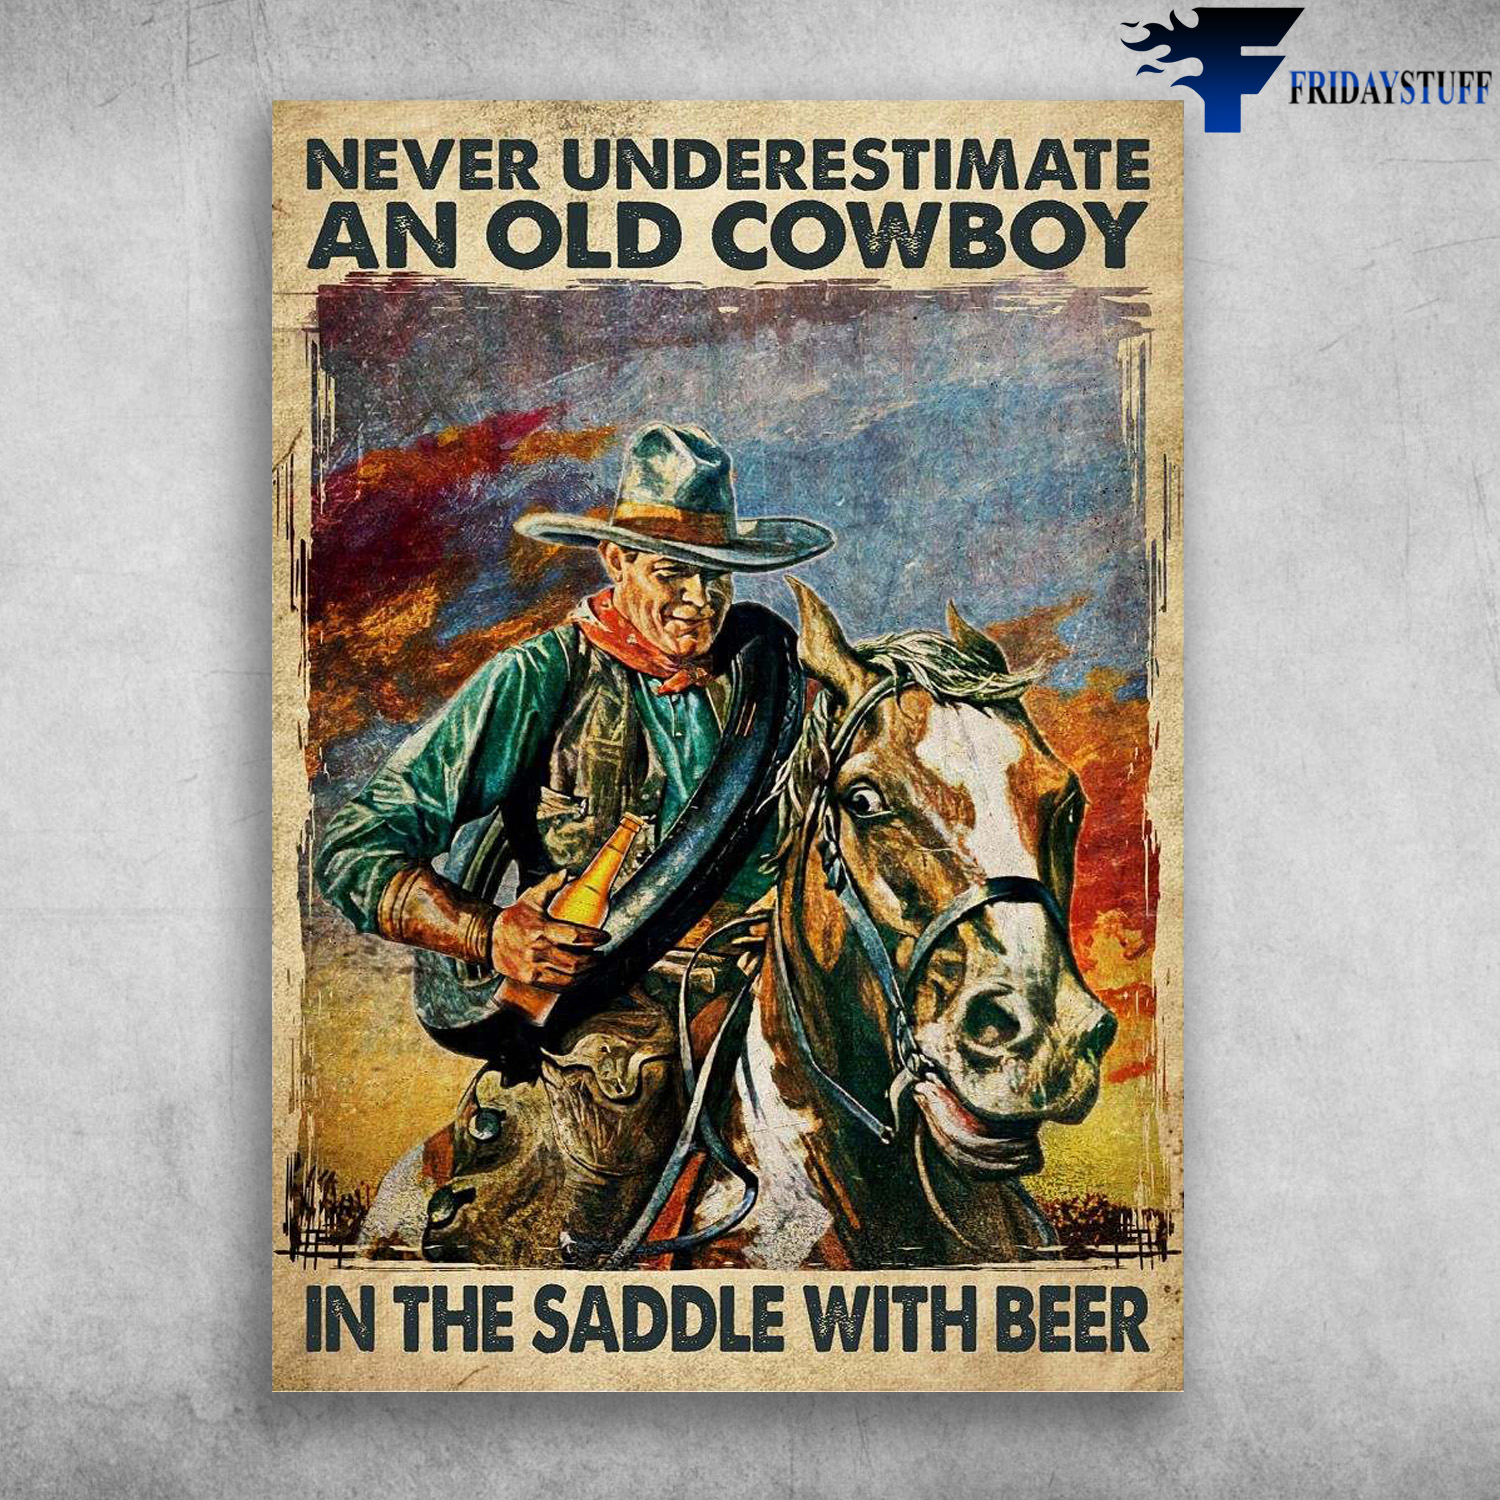 Cowboy Riding Horse, Cowboy Drink - Never Underestimate, An Cowboy, In The Saddle With Beer